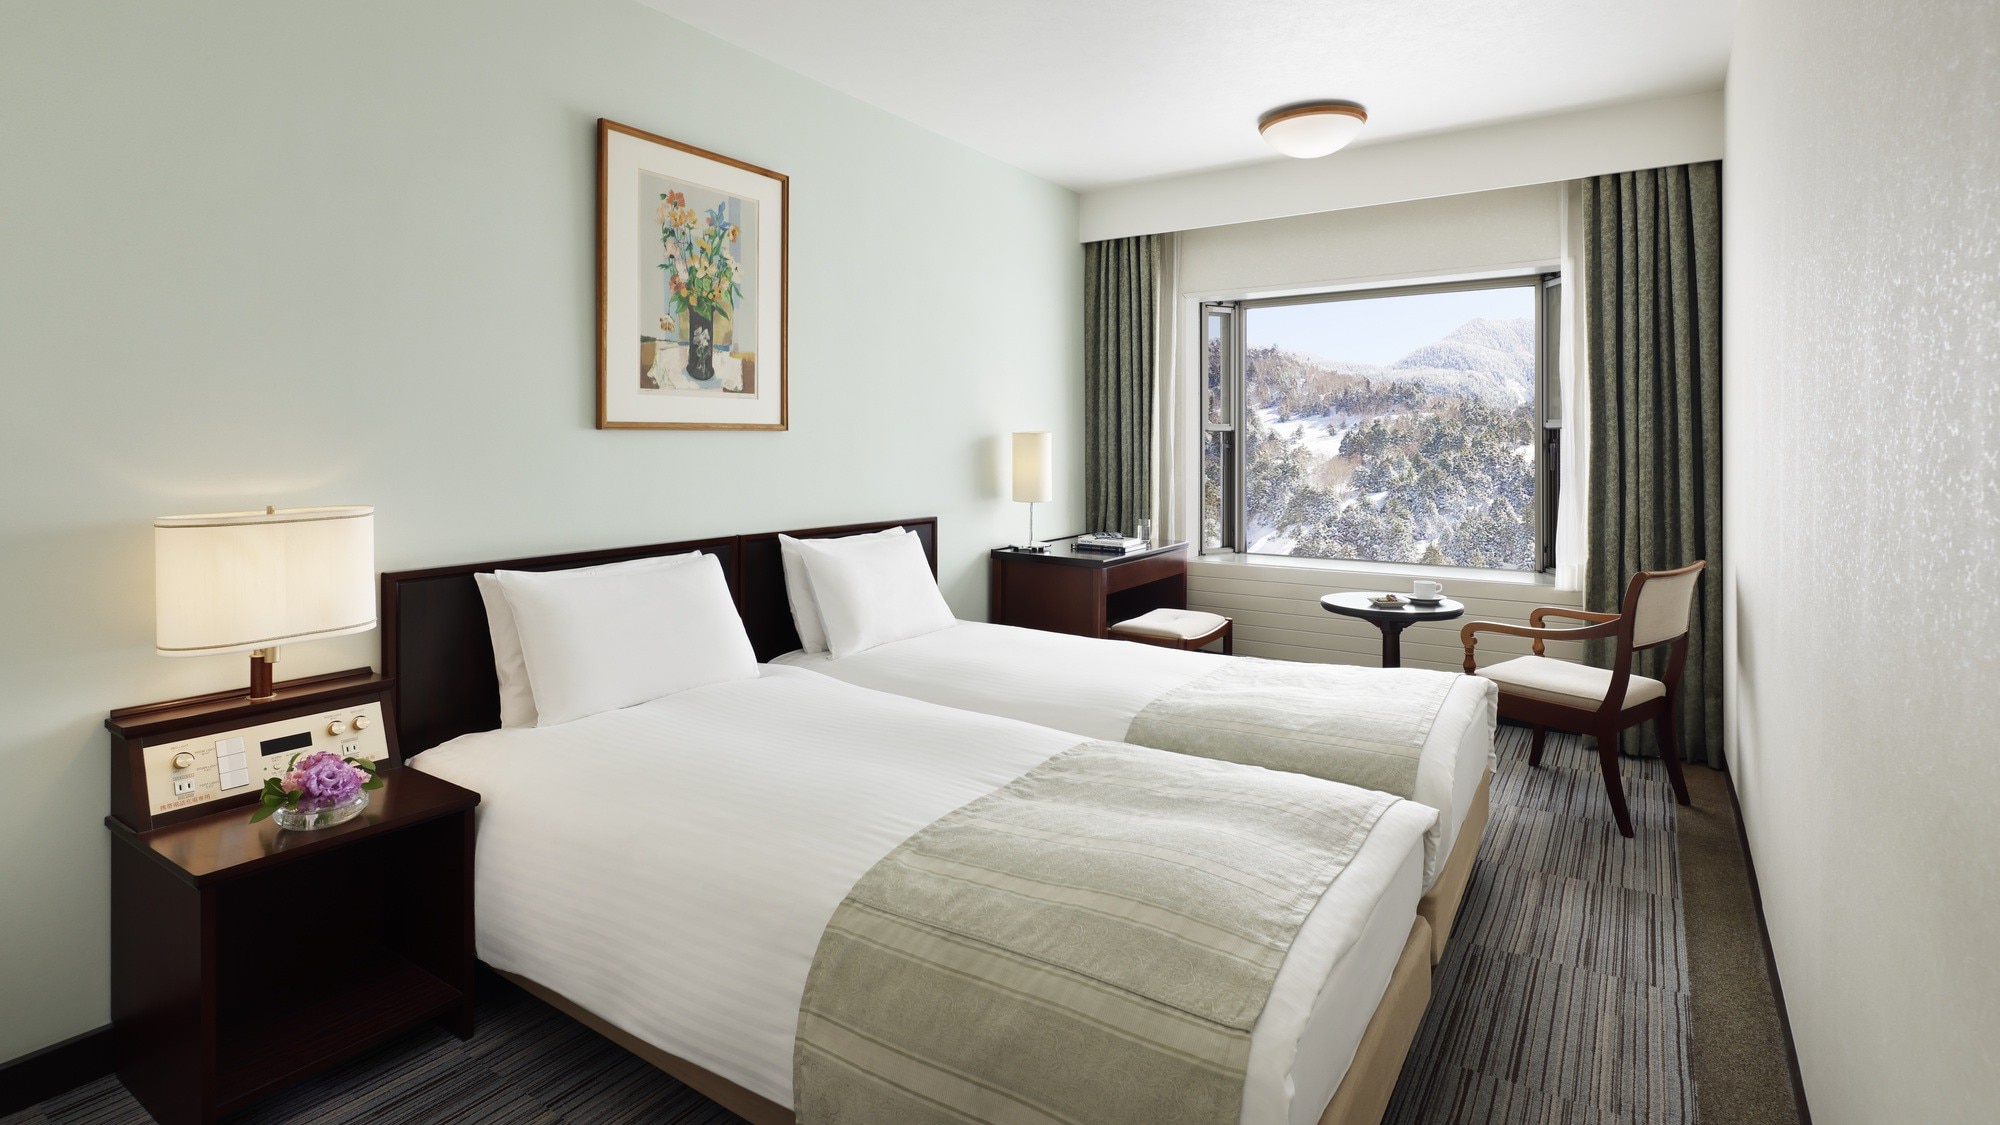 [East building twin room] A compact, easy-to-use guest room close to the hot spring bath.